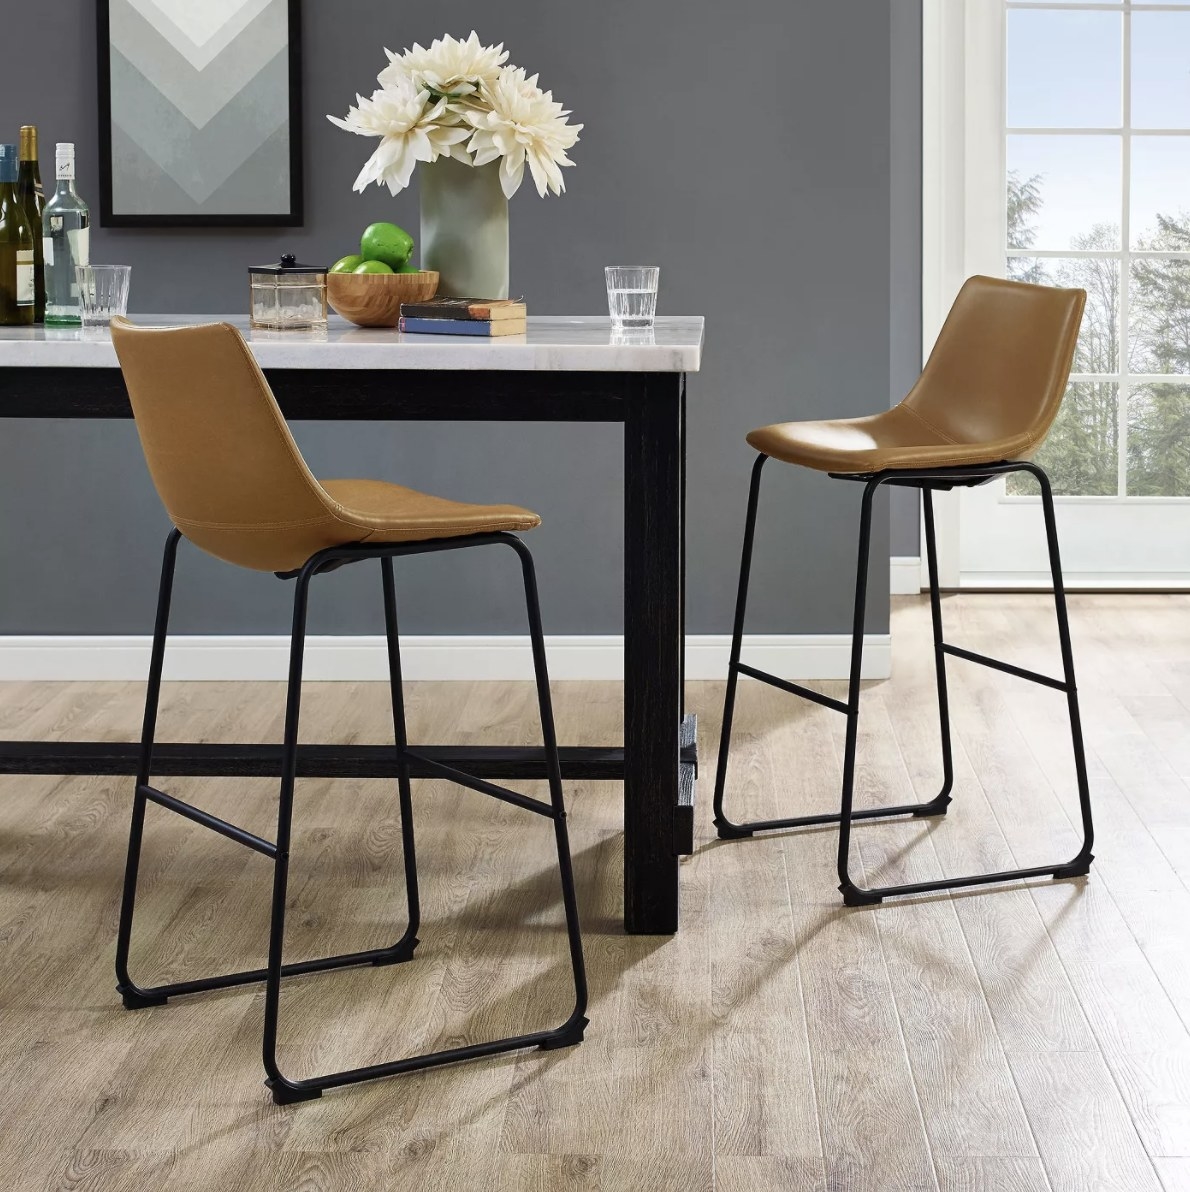 The tan leather barstools are placed around a high marble table with food and drinkware